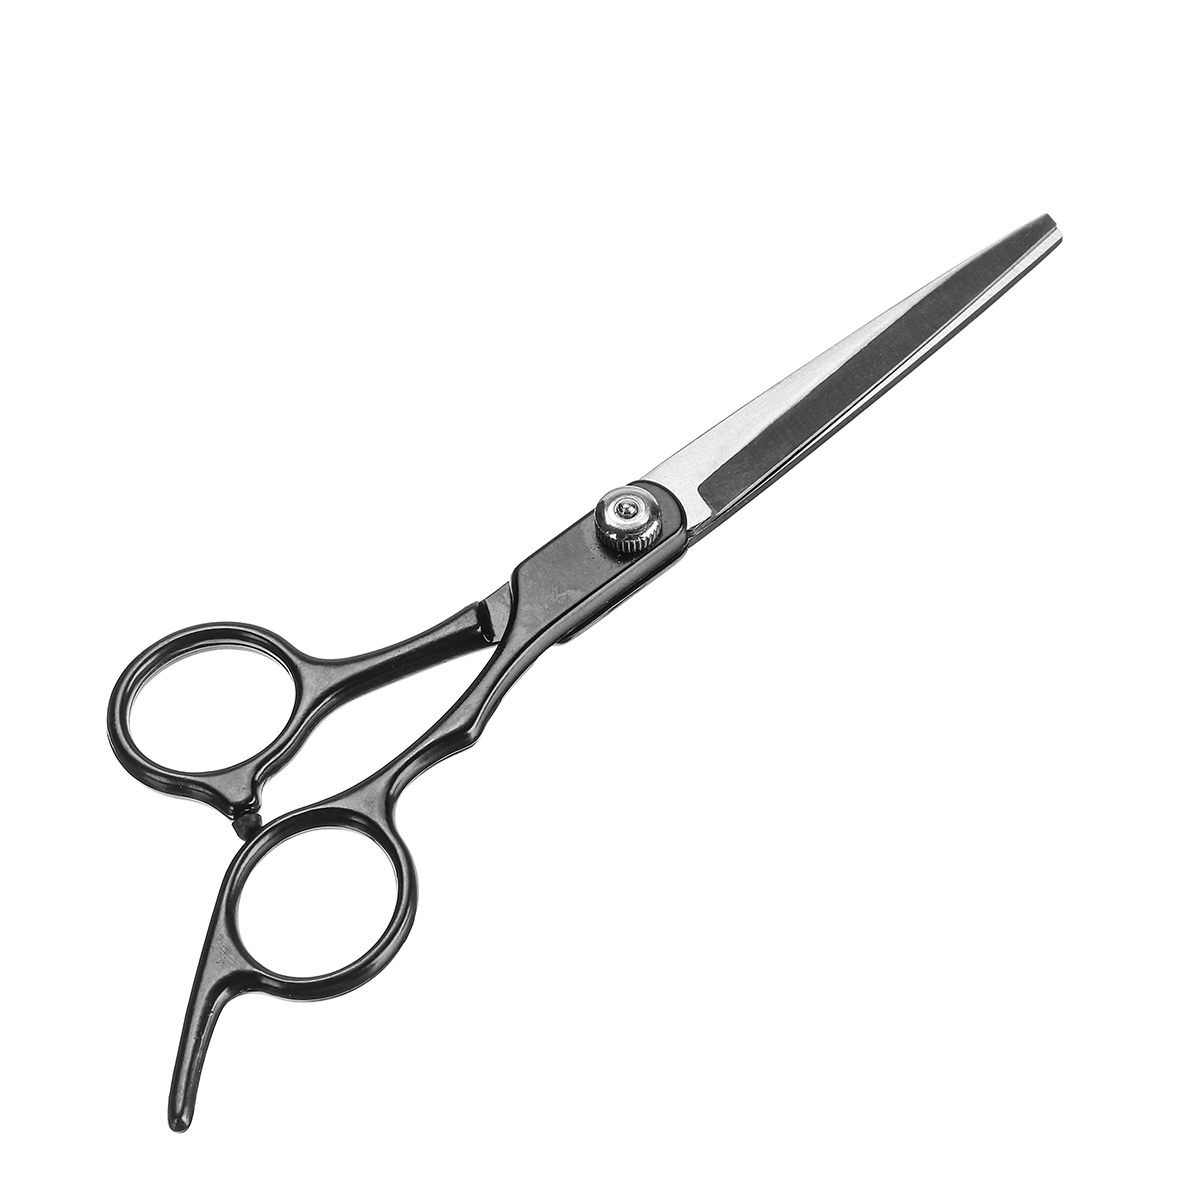 13Pcs-Stainless-Steel-Hairdressing-Shears-Set-Professional-Thinning-Scissors-For-BarberSalonHomeMenW-1906111-8